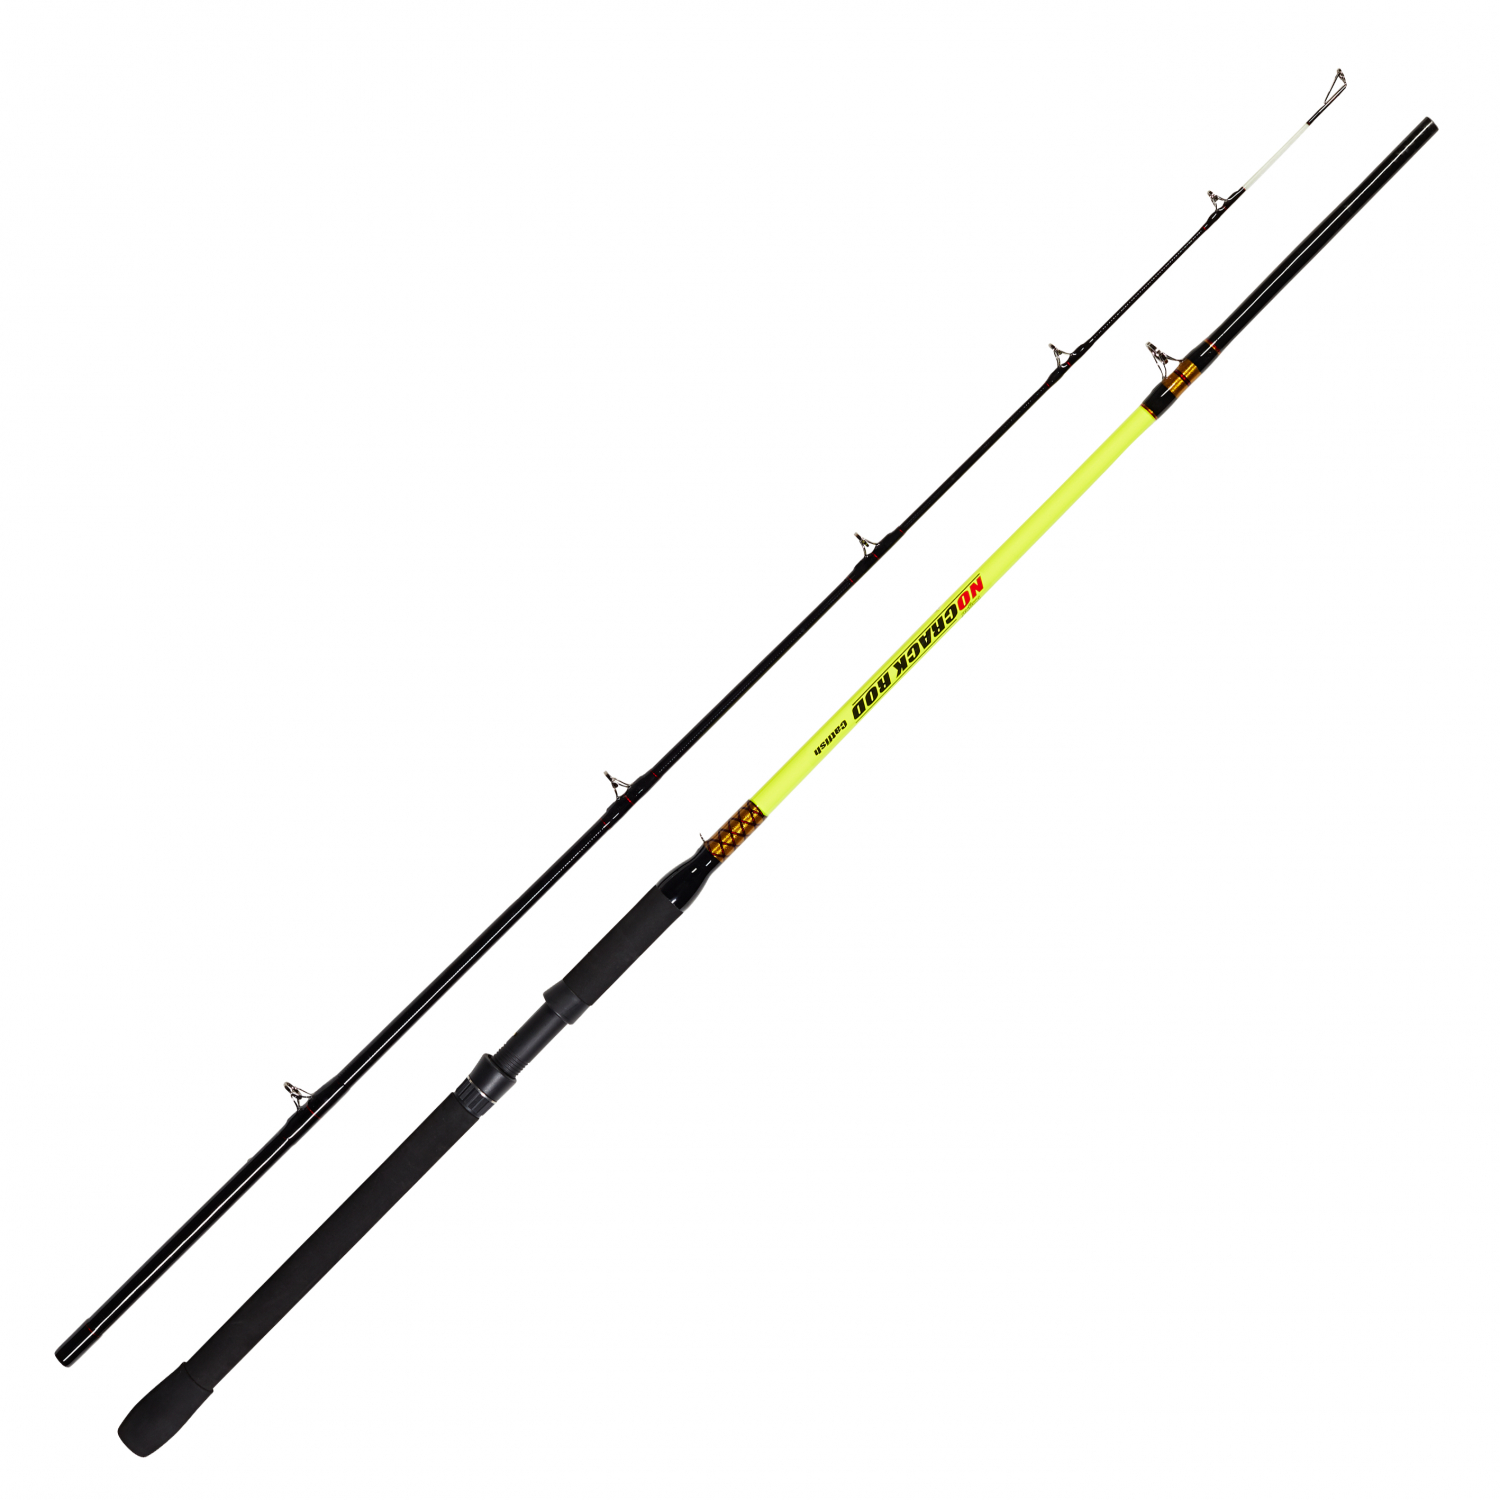 Kogha Catfish Rod No Crack at low prices